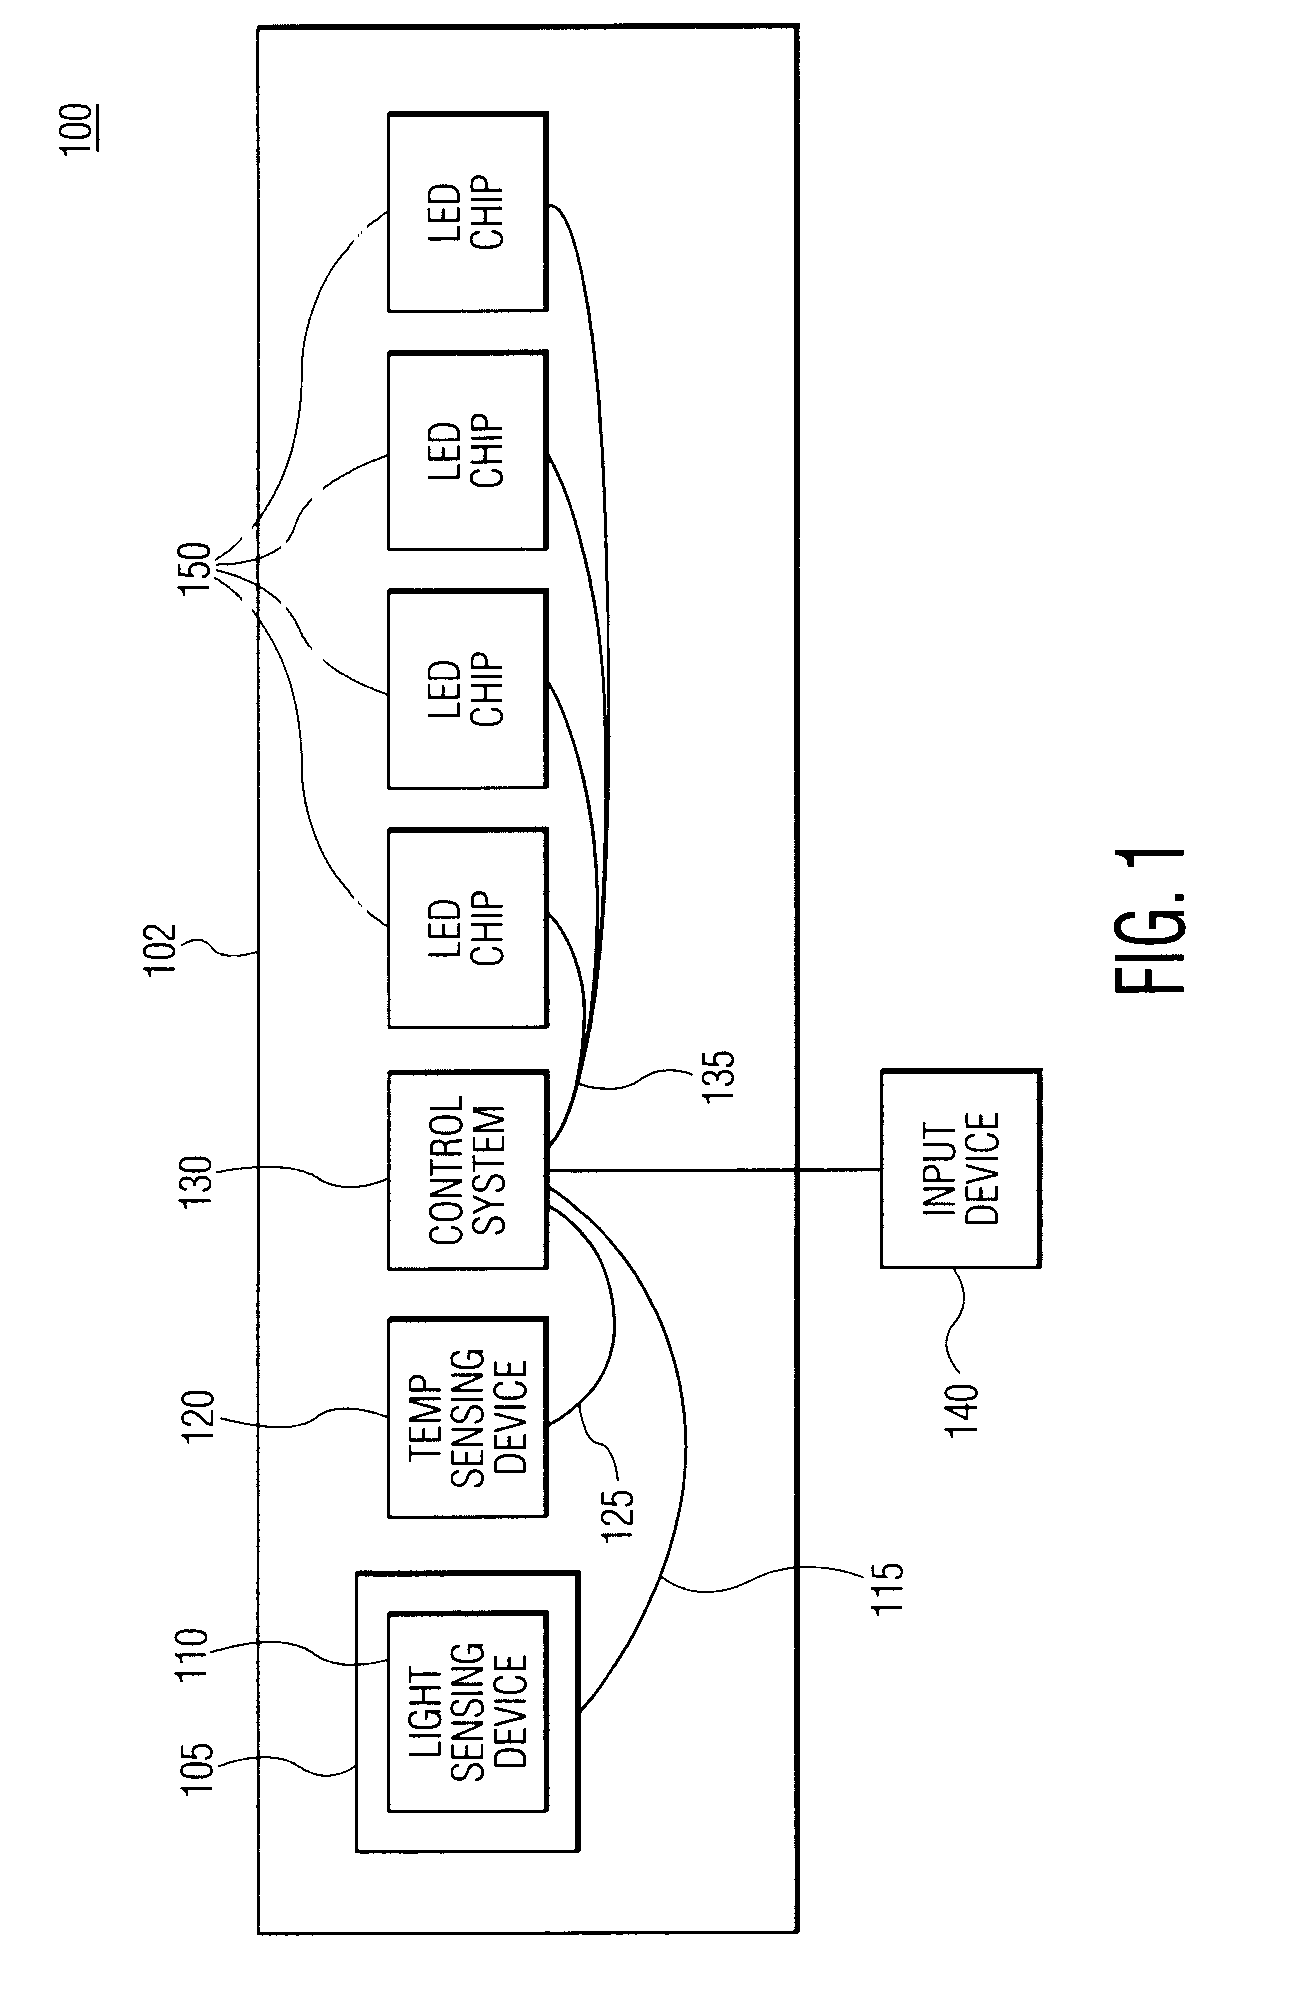 Method for maintaining light characteristics from a multi-chip LED package